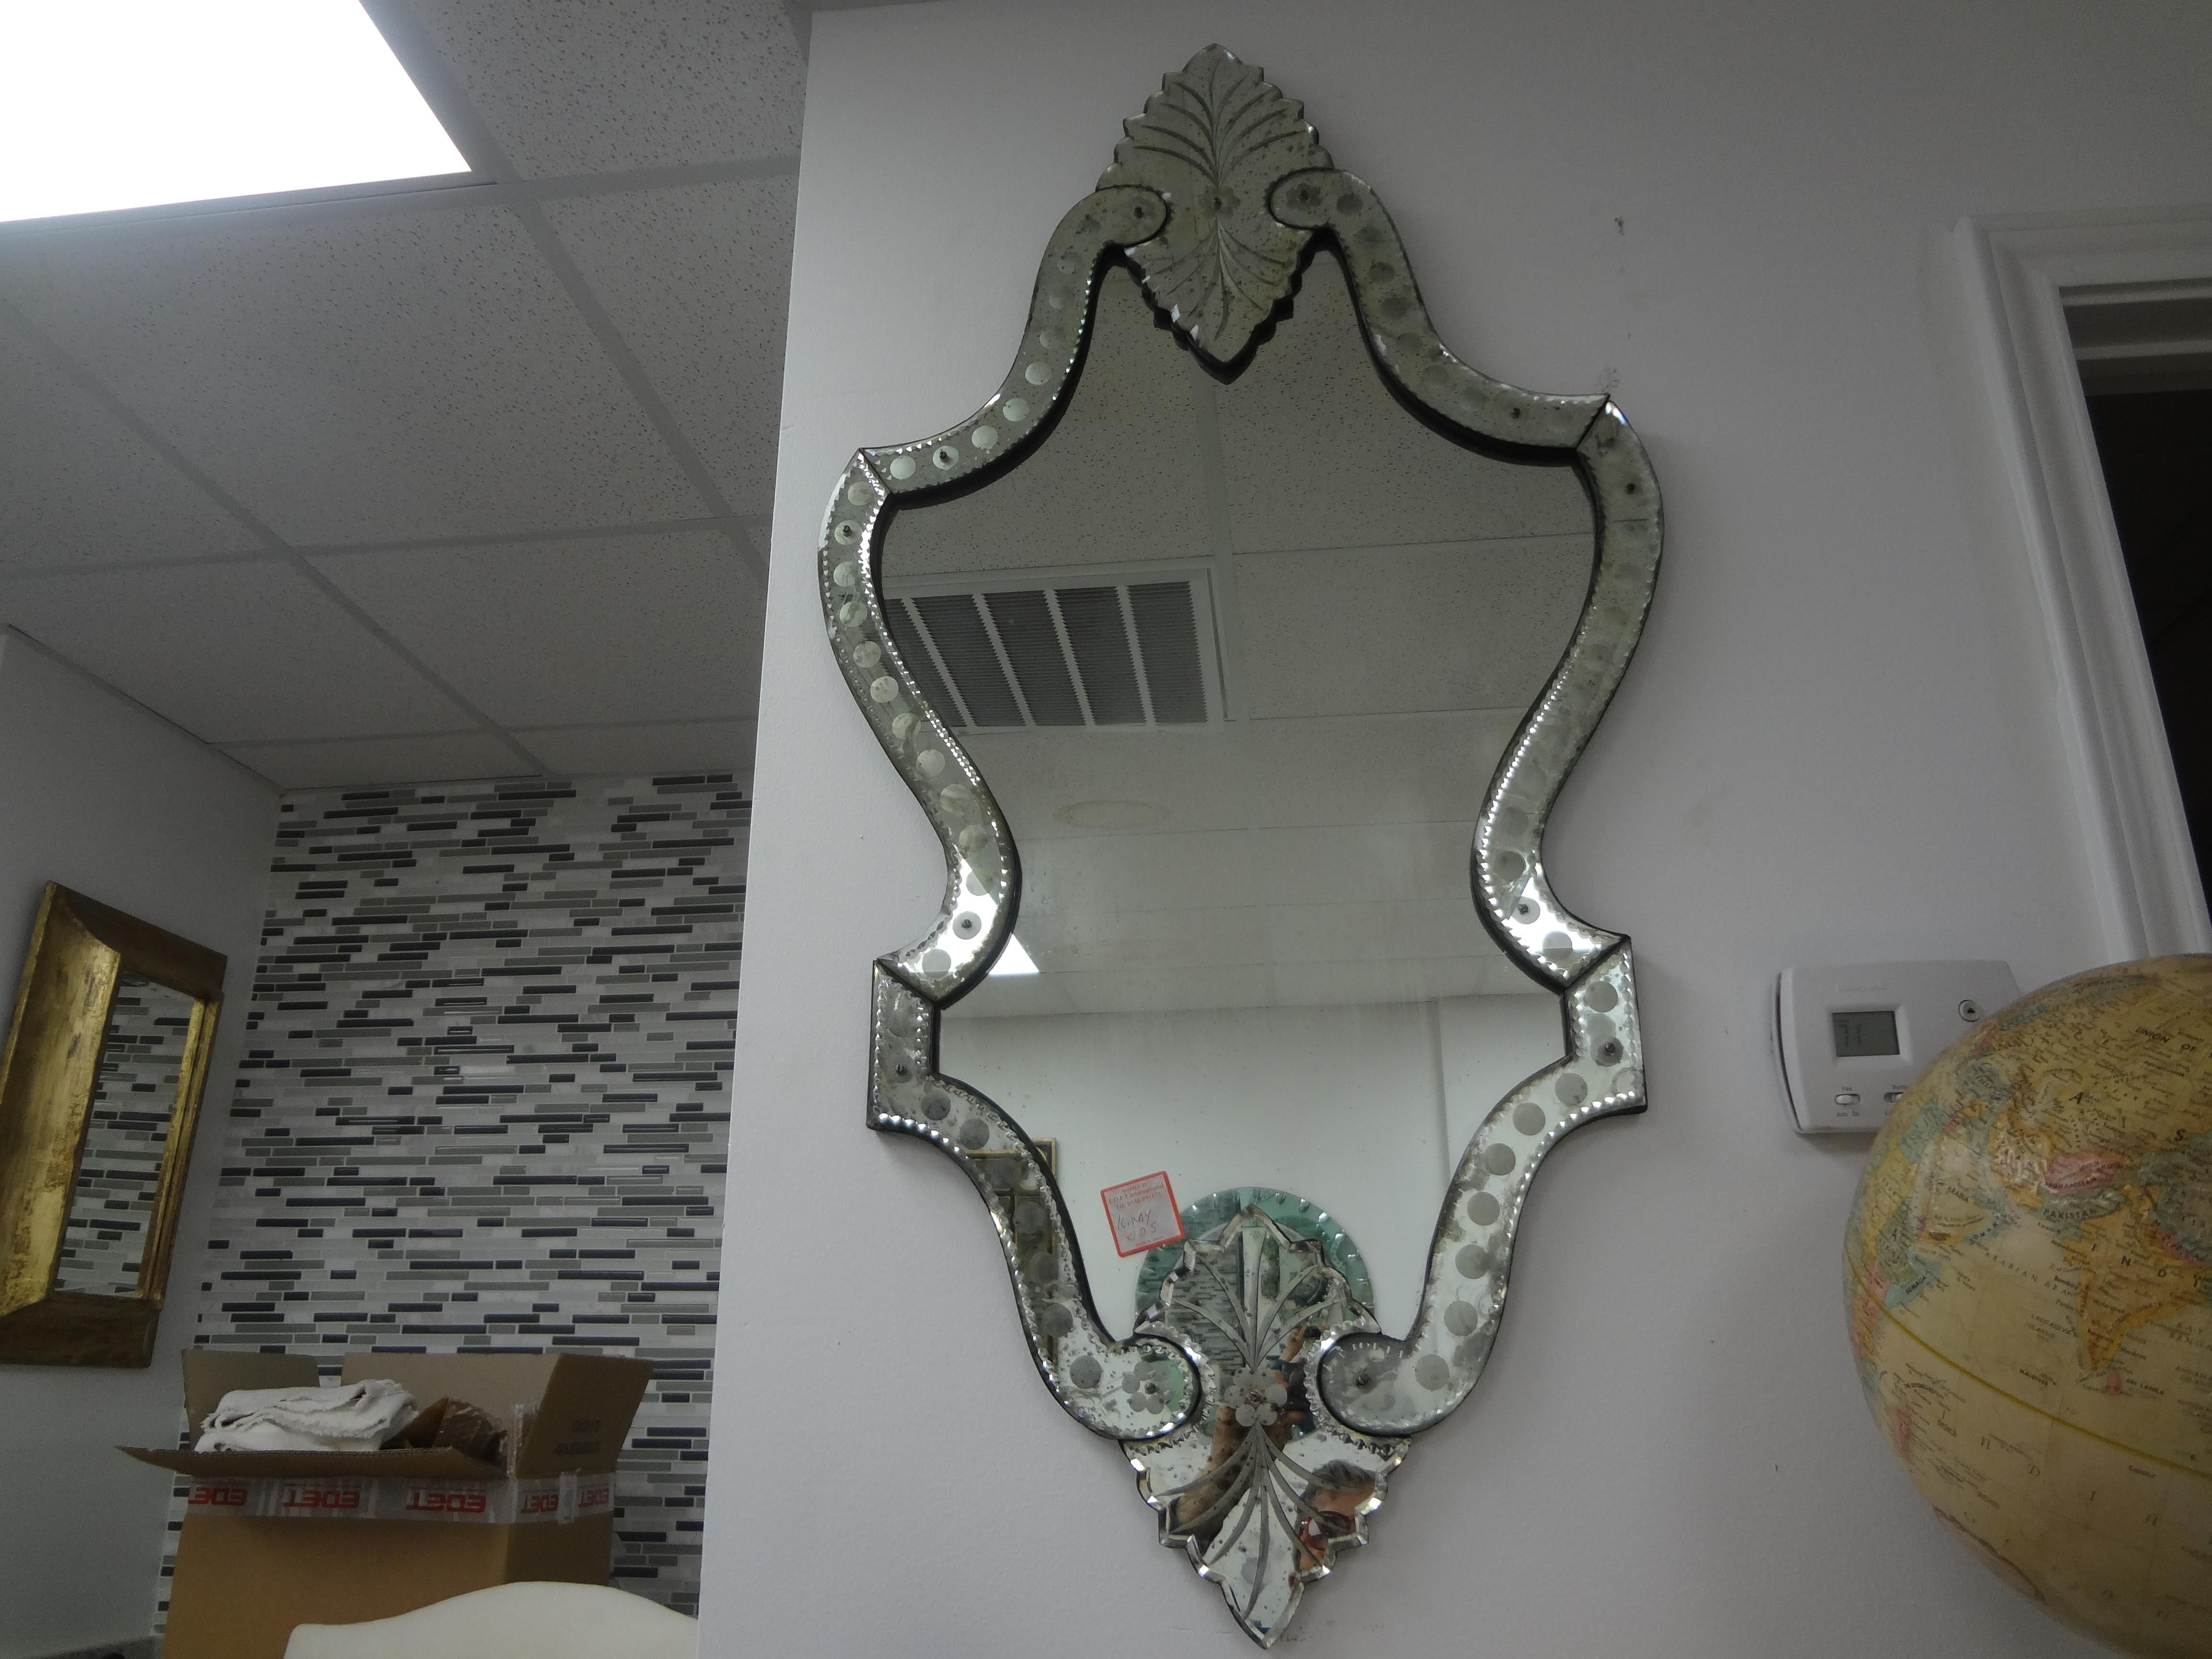 Vintage Etched Venetian Mirror.
This slender vintage etched Venetian mirror is loaded with style...
Our Italian Hollywood Regency Venetian mirror makes a chic accent mirror for a powder room or dressing room!